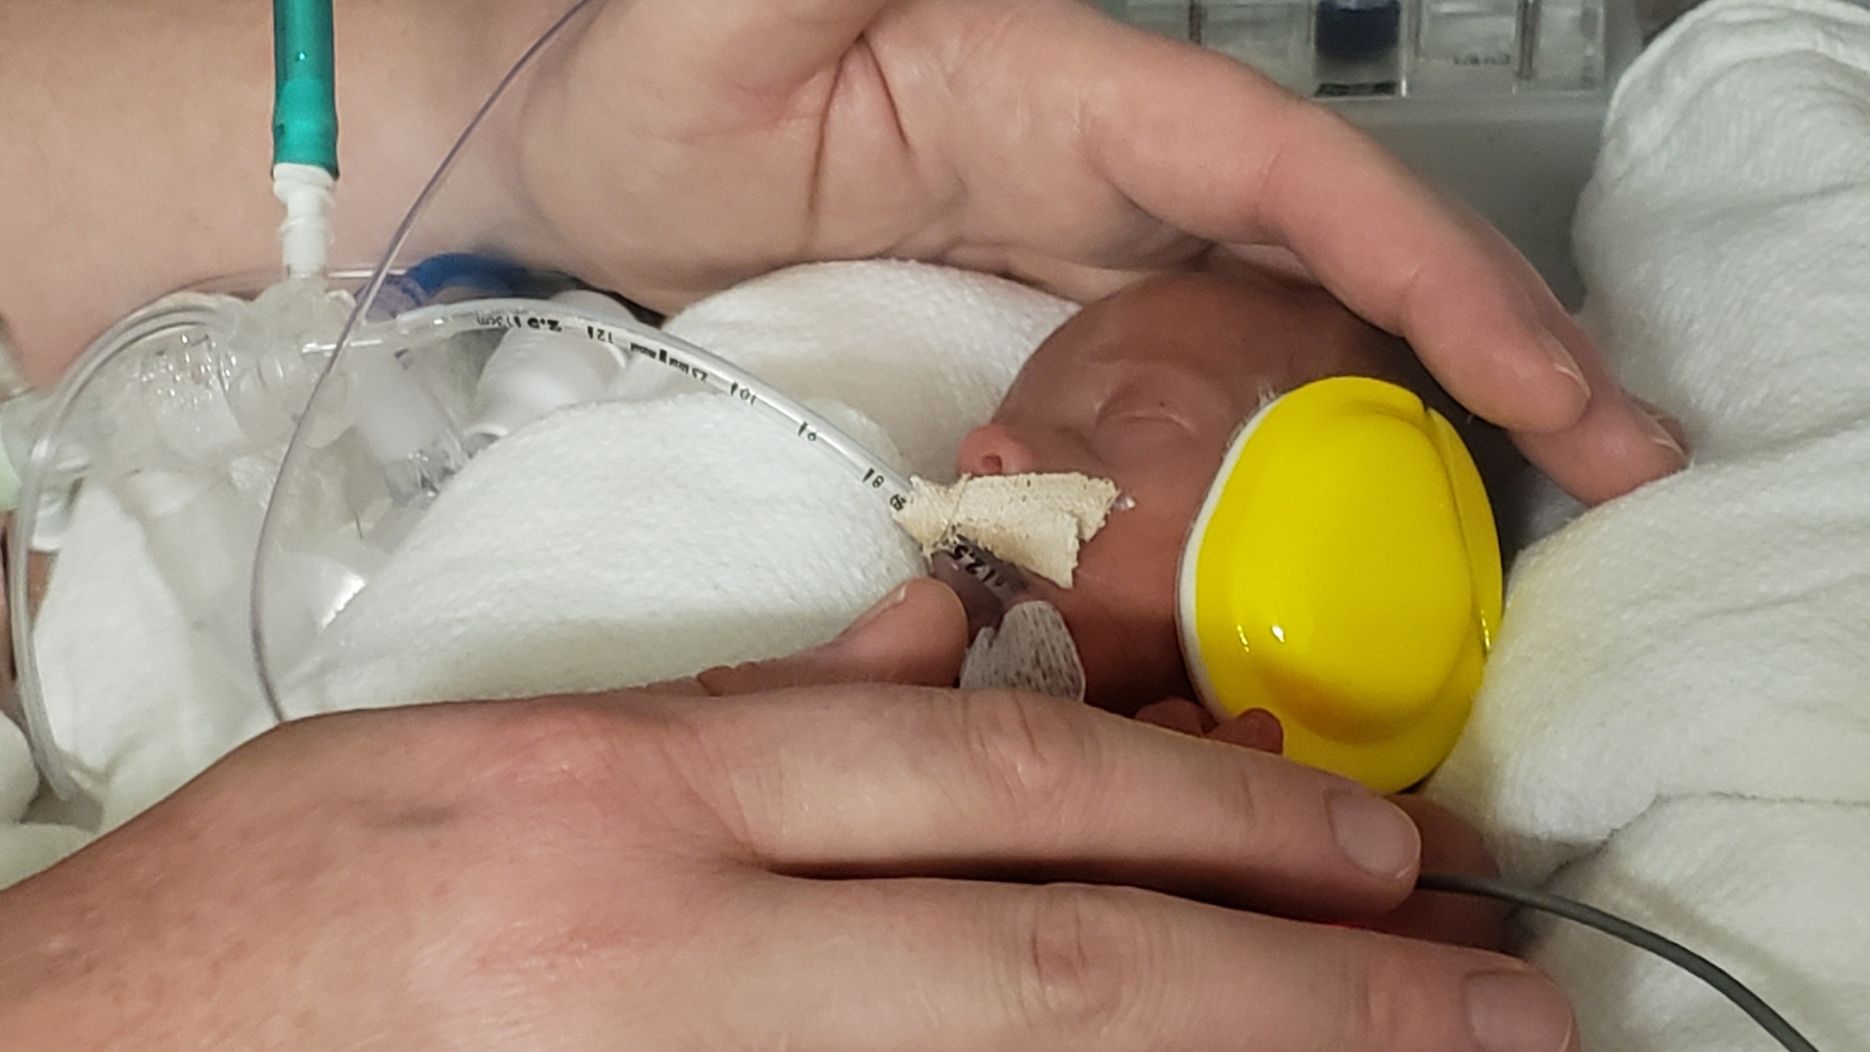 a nicu baby sleeps while a parent places their hands near the baby